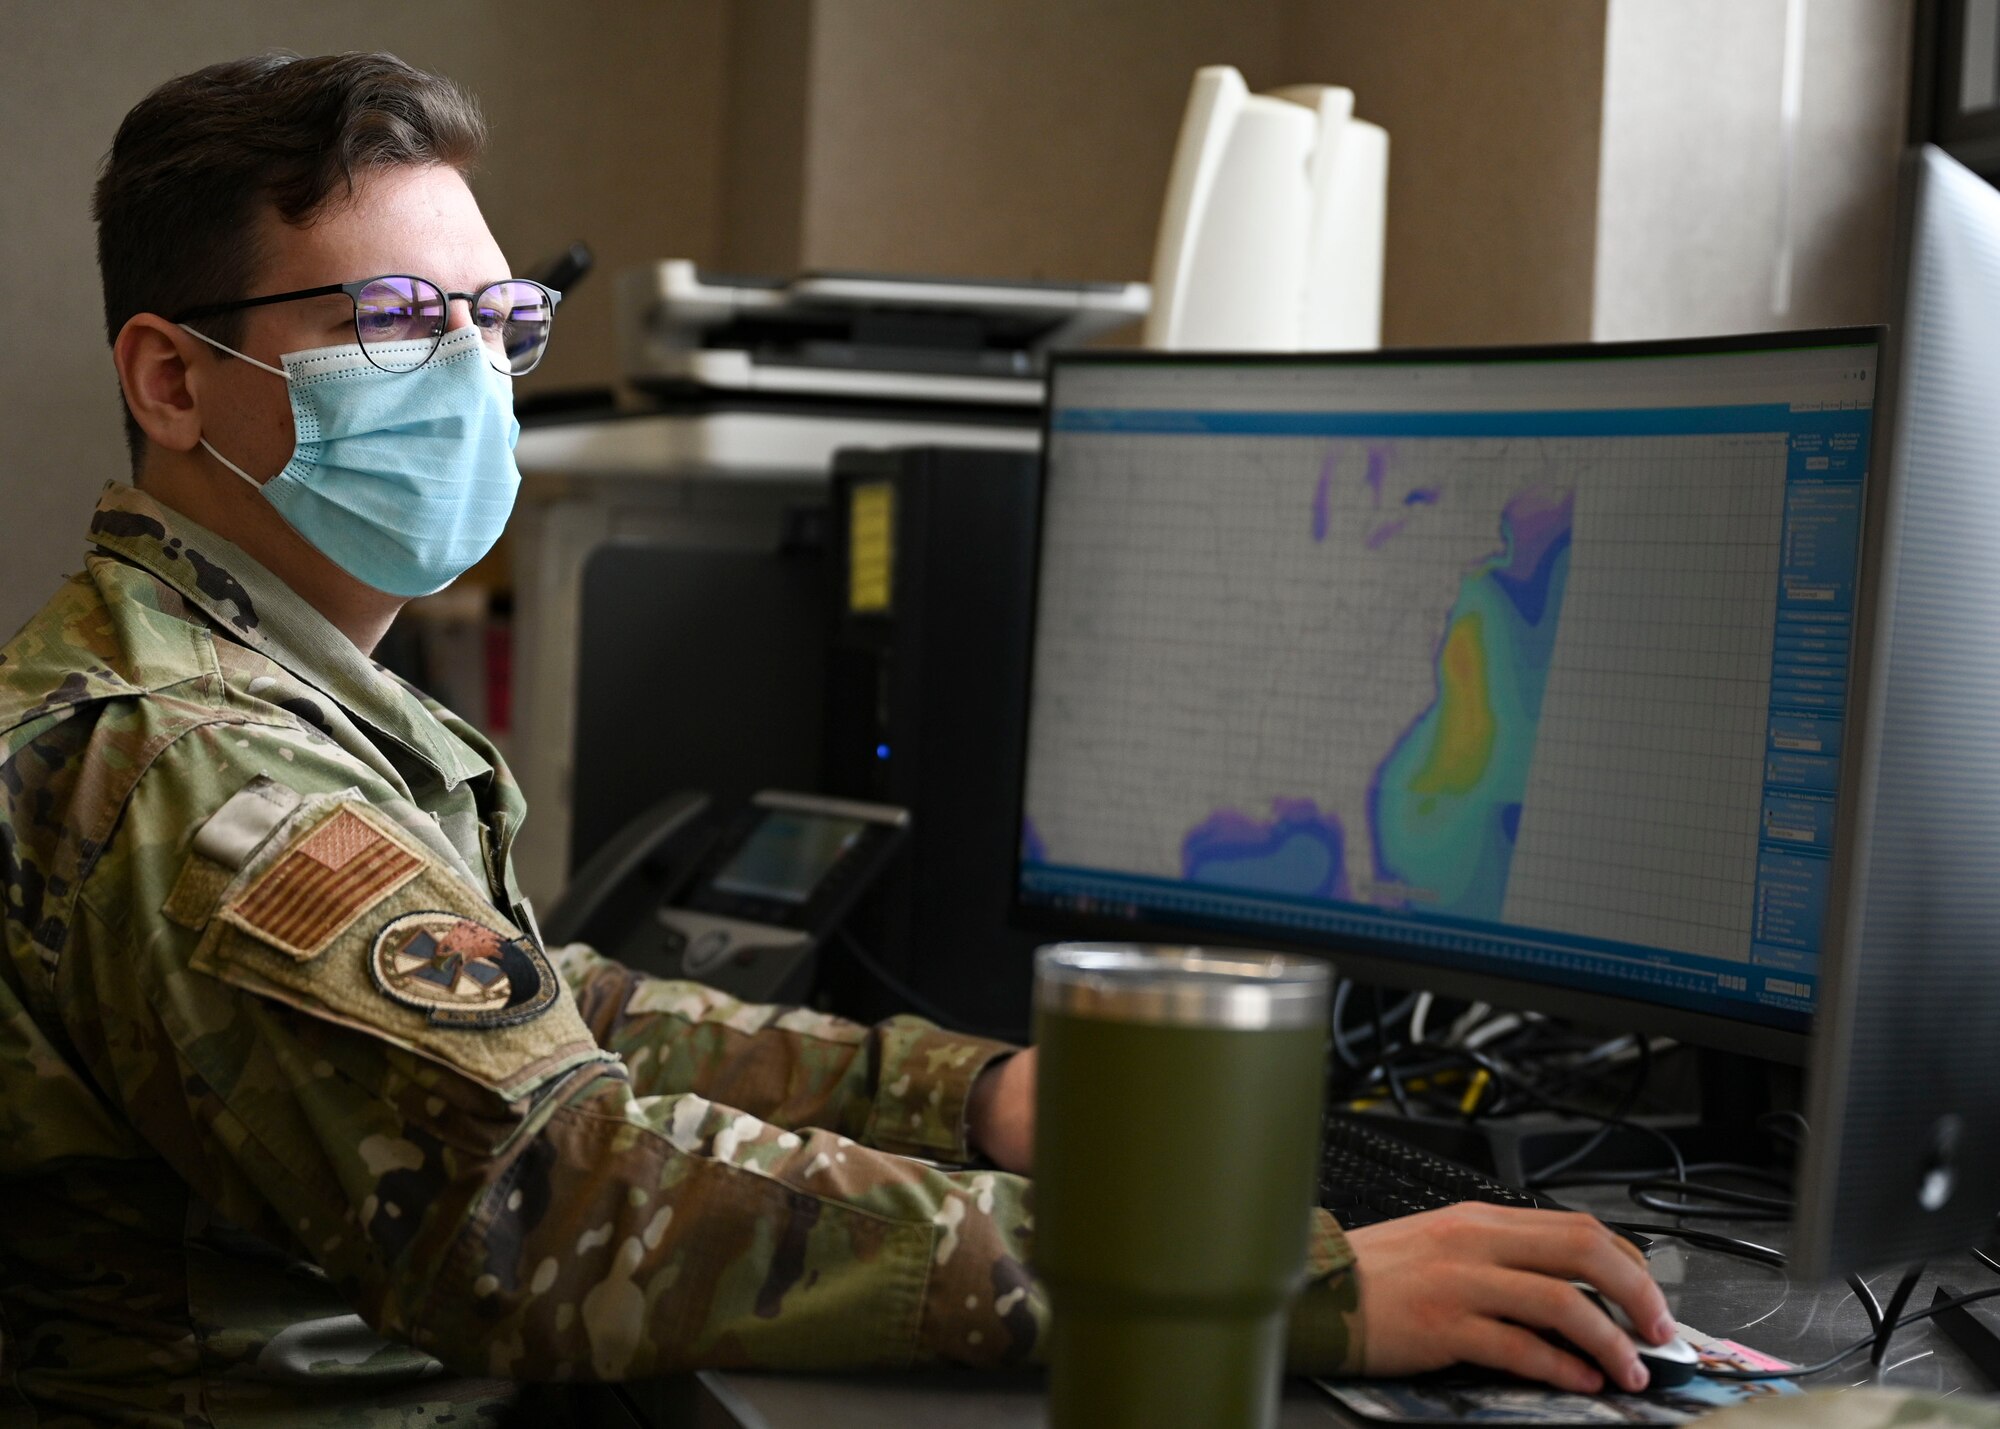 Airman checking weather